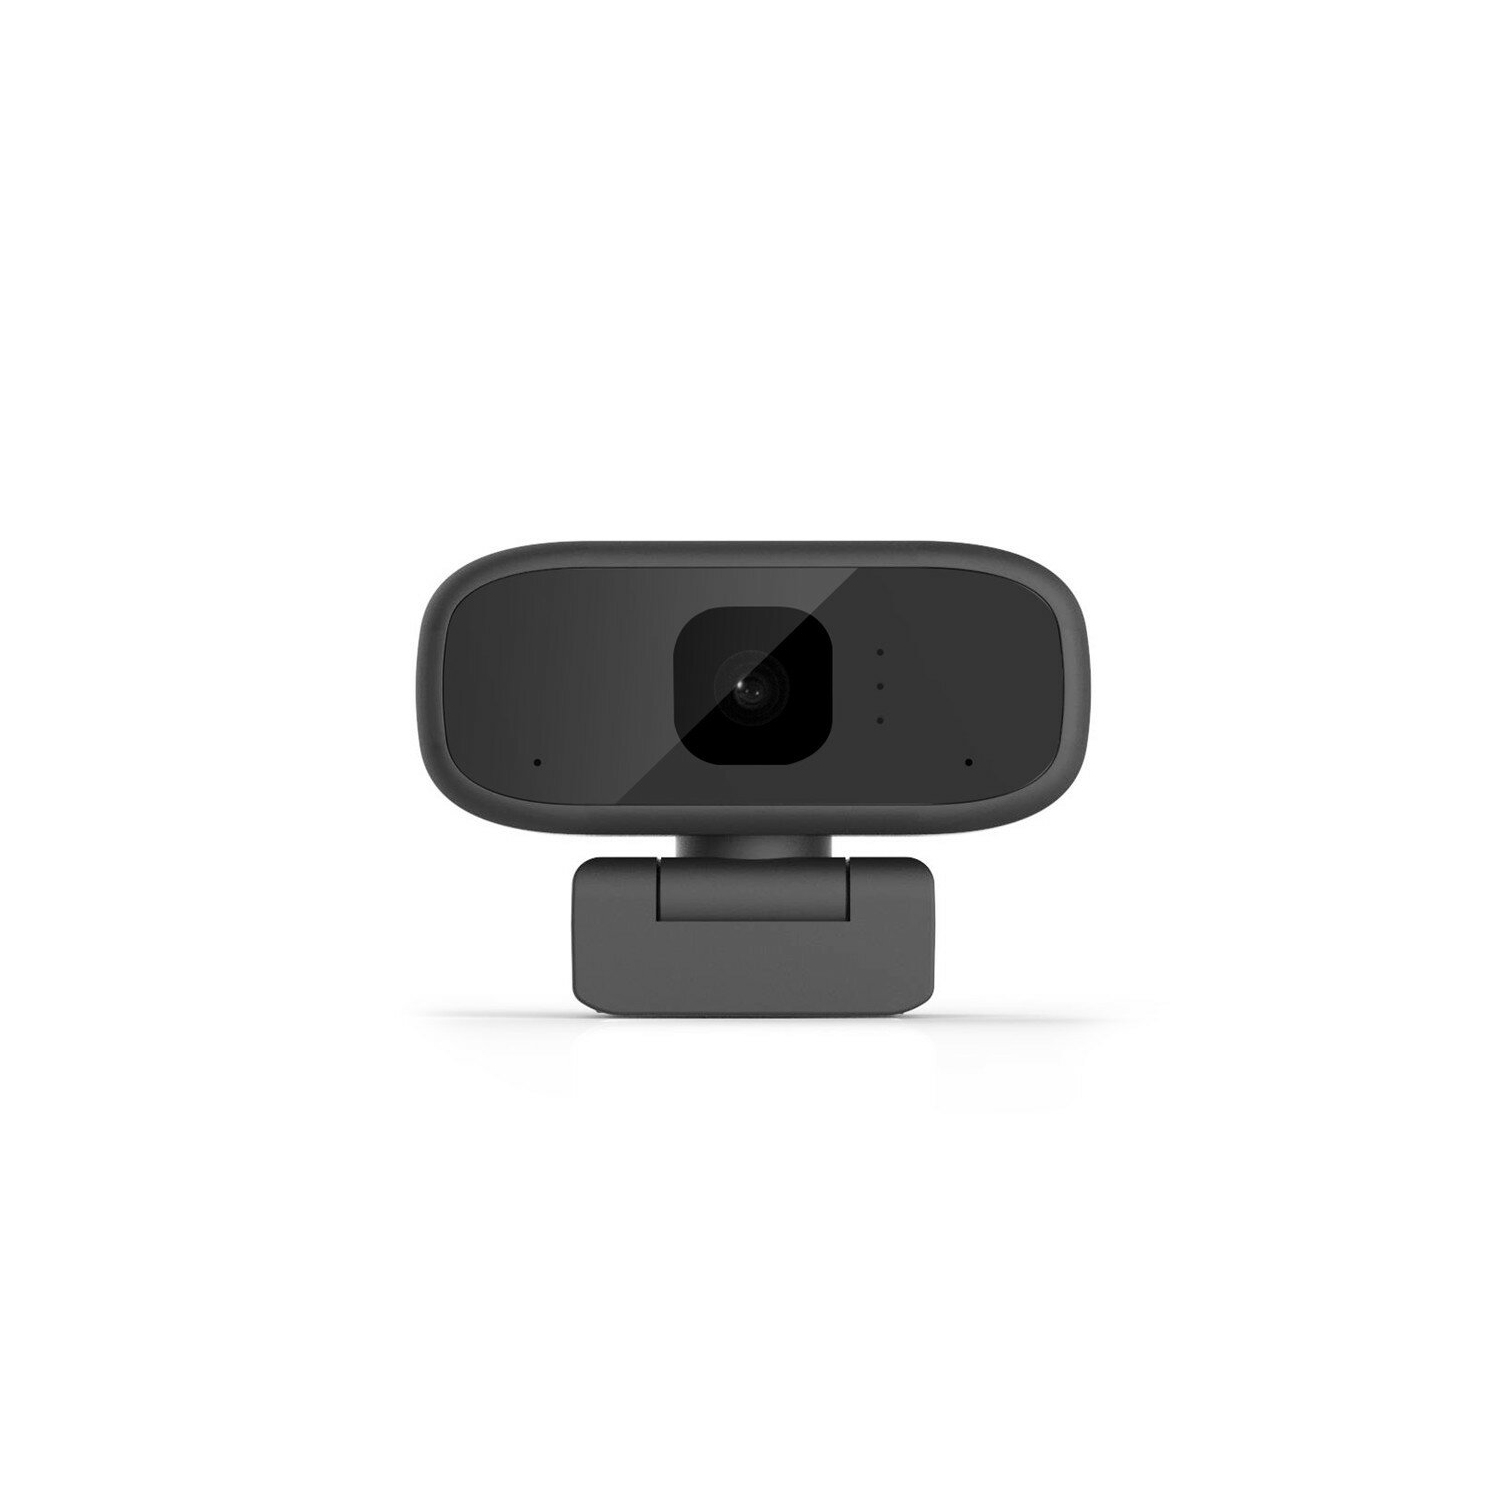 HD 720P Webcam CMOS 30FPS USB 2.0 Built-in Microphone USB Wired Webcam HD Web Camera for Desktop Computer Notebook PC